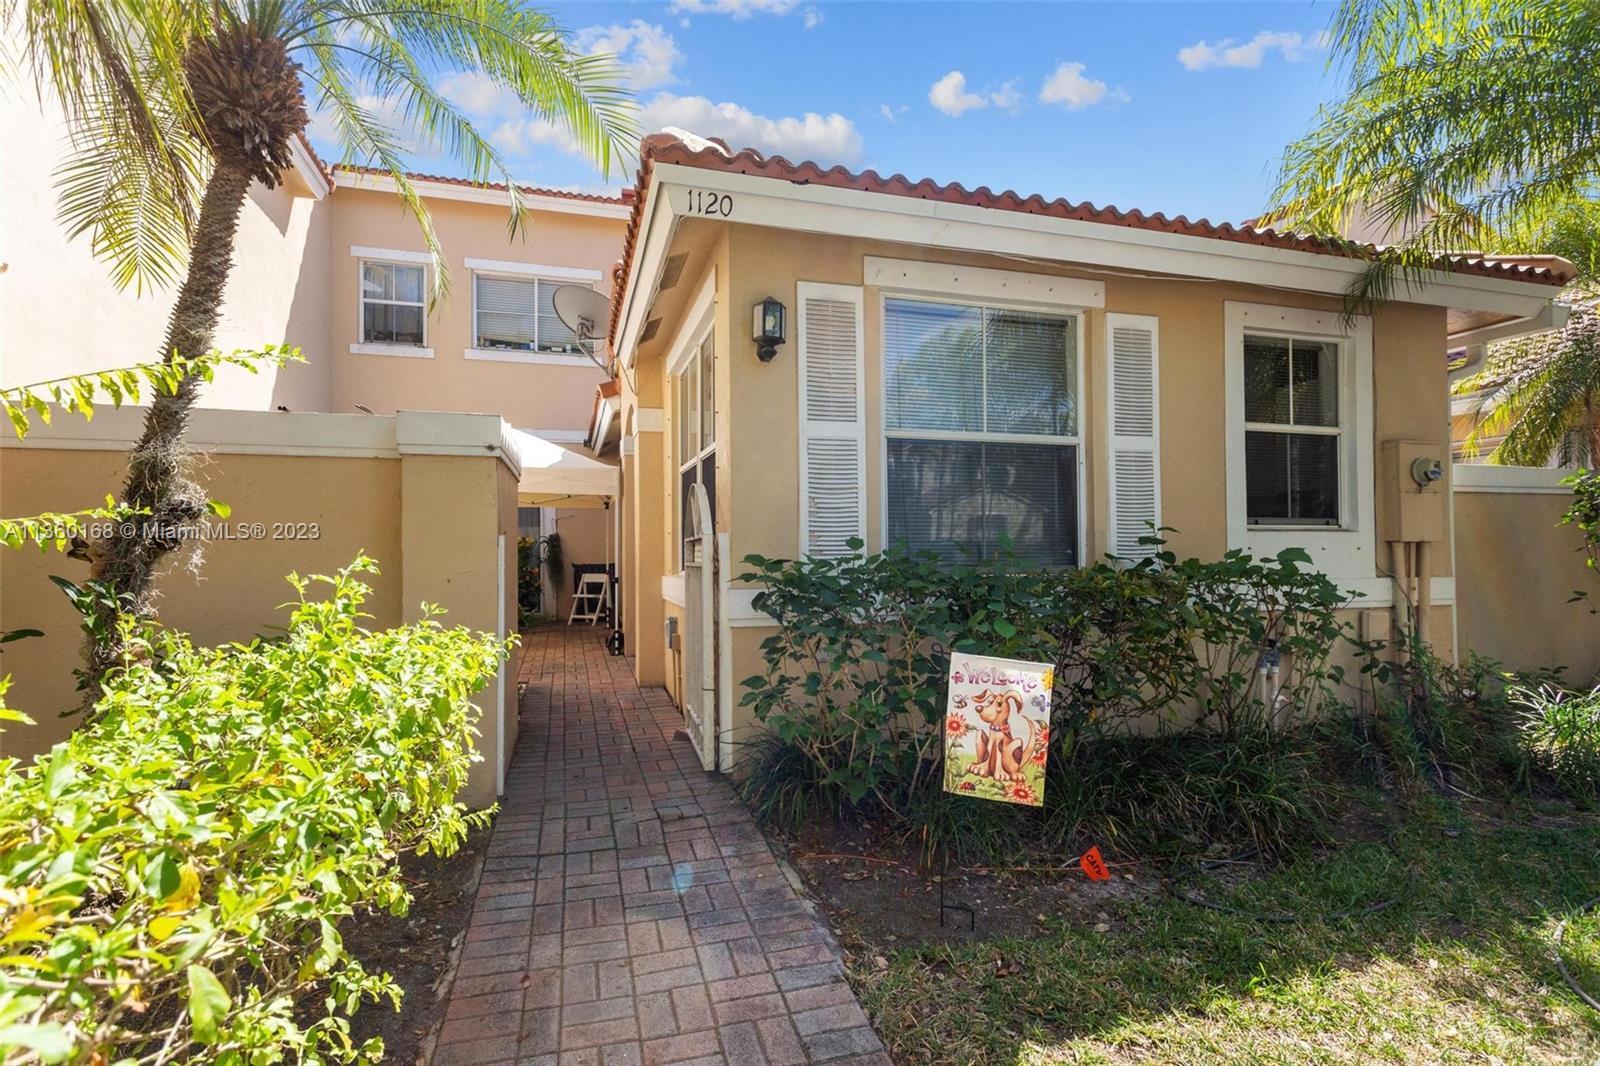 Gorgeous west lake village gated community! 1 mile from the ocean, close by to Hollywood beach. 2 st